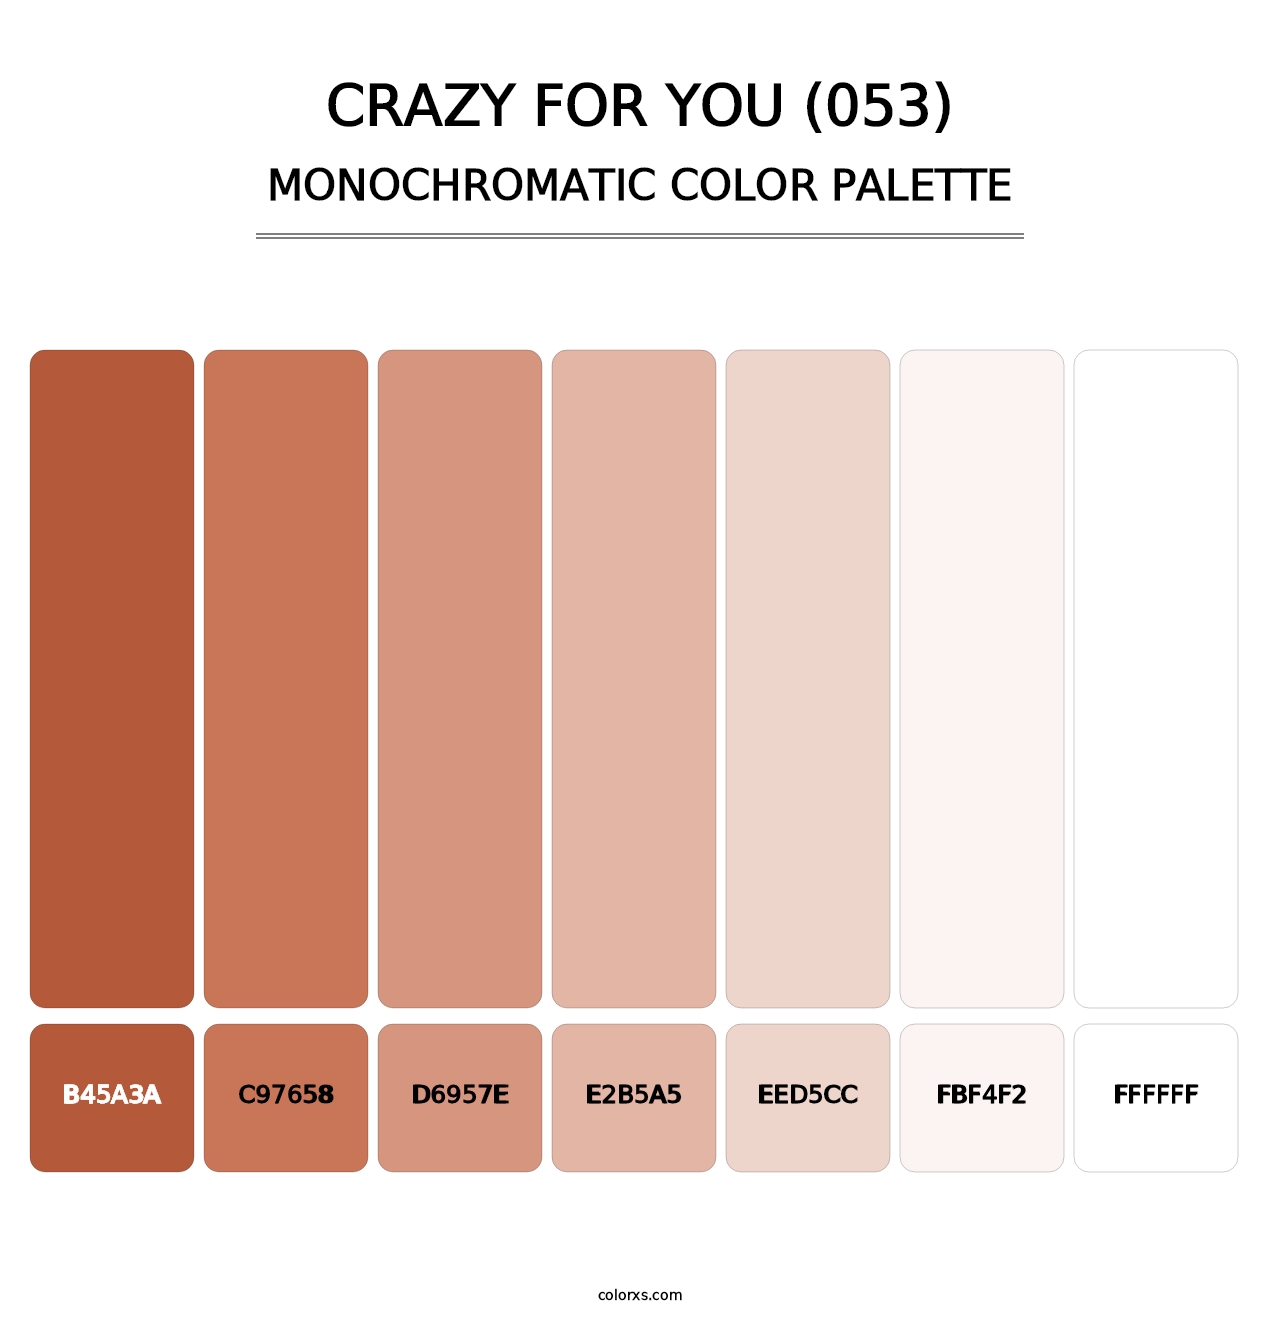 Crazy For You (053) - Monochromatic Color Palette